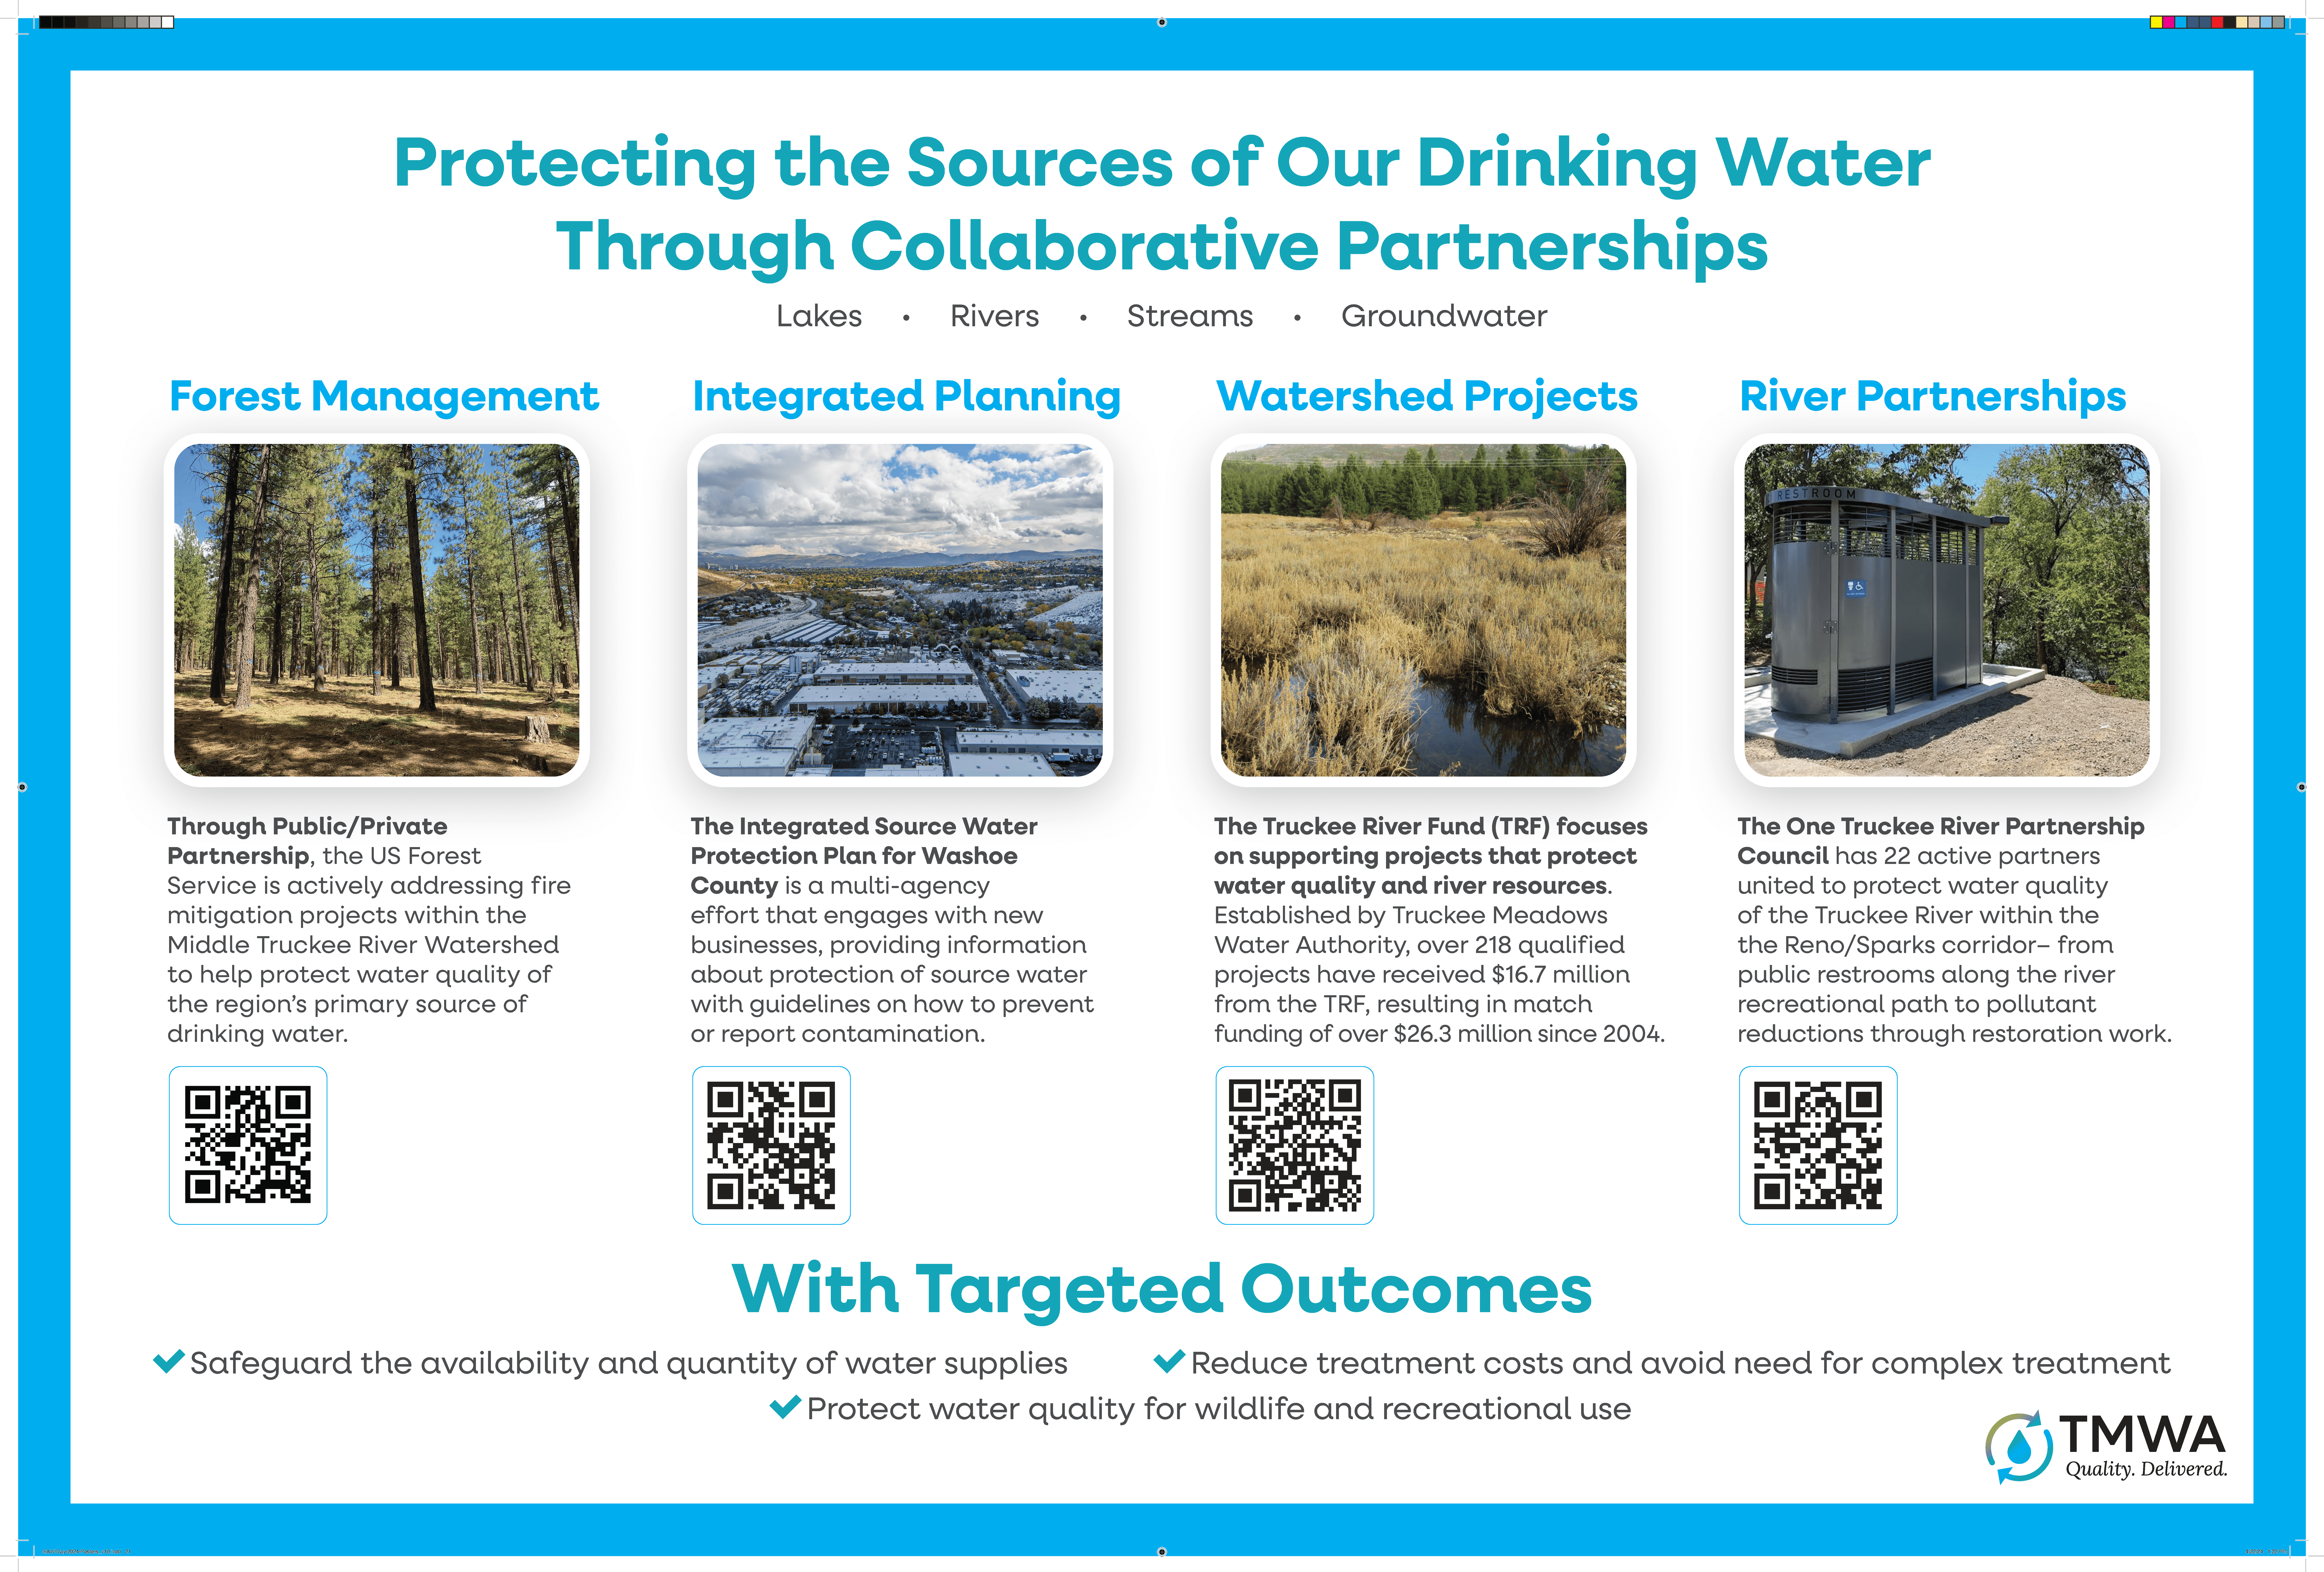 Partnership Programs to Project the Watershed